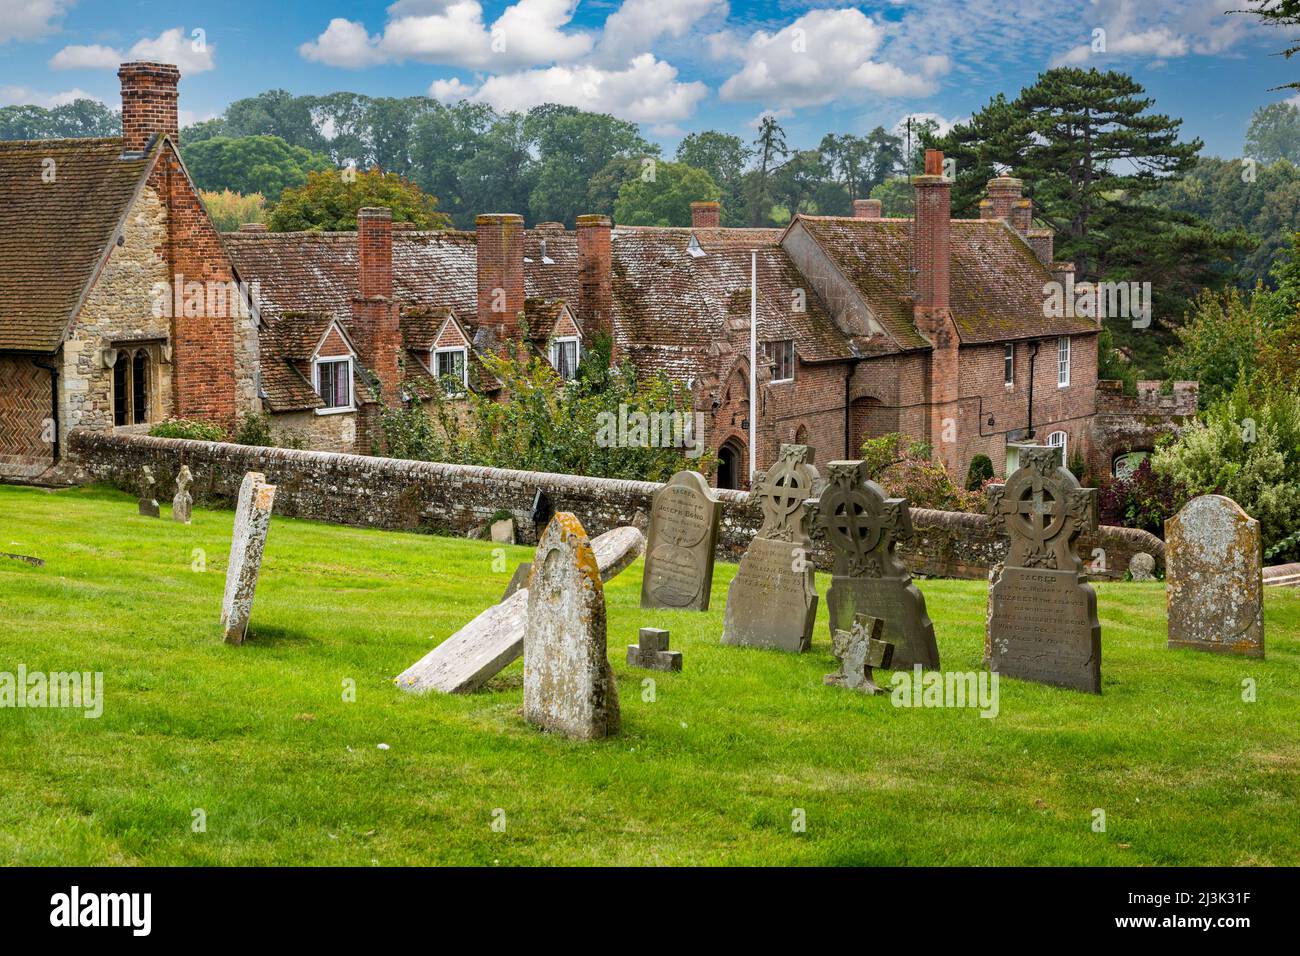 UK, England, Ewelme.  Graveyard of St. Mary the Virgin Church, with Almshouse and School in background. Stock Photo